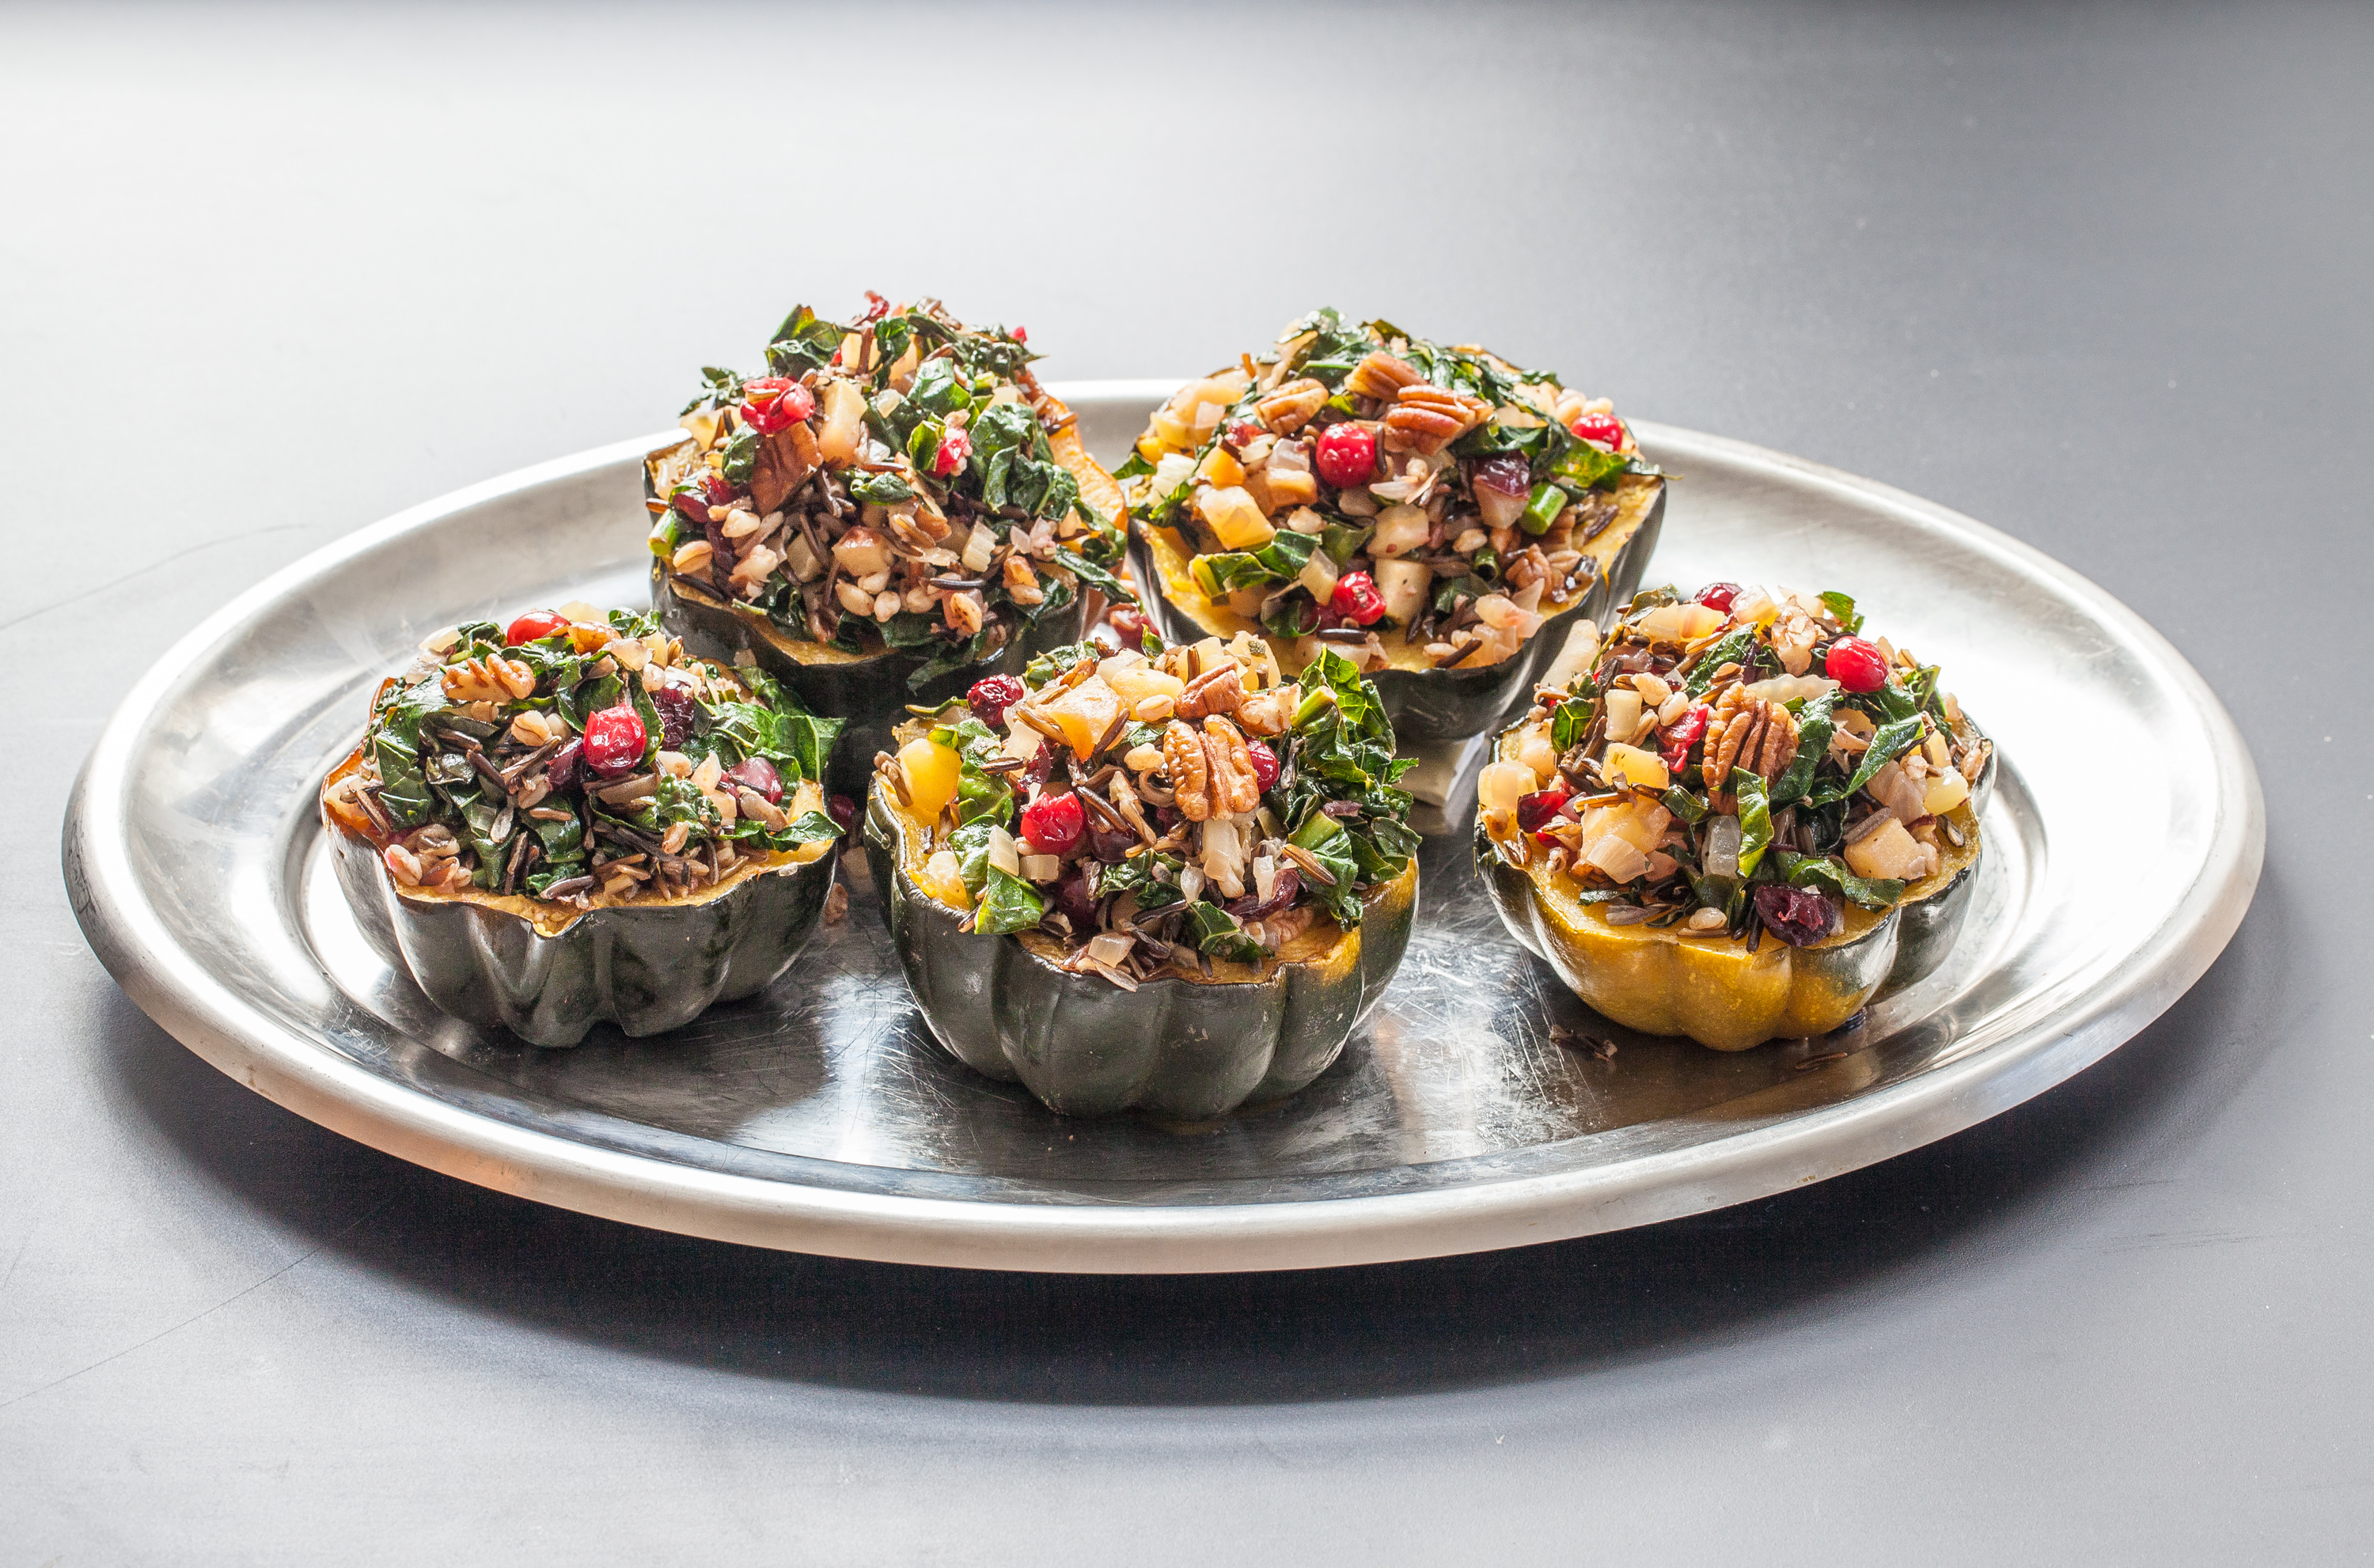 Stuffed acorn squash with wild rice, farro, and cranberries.